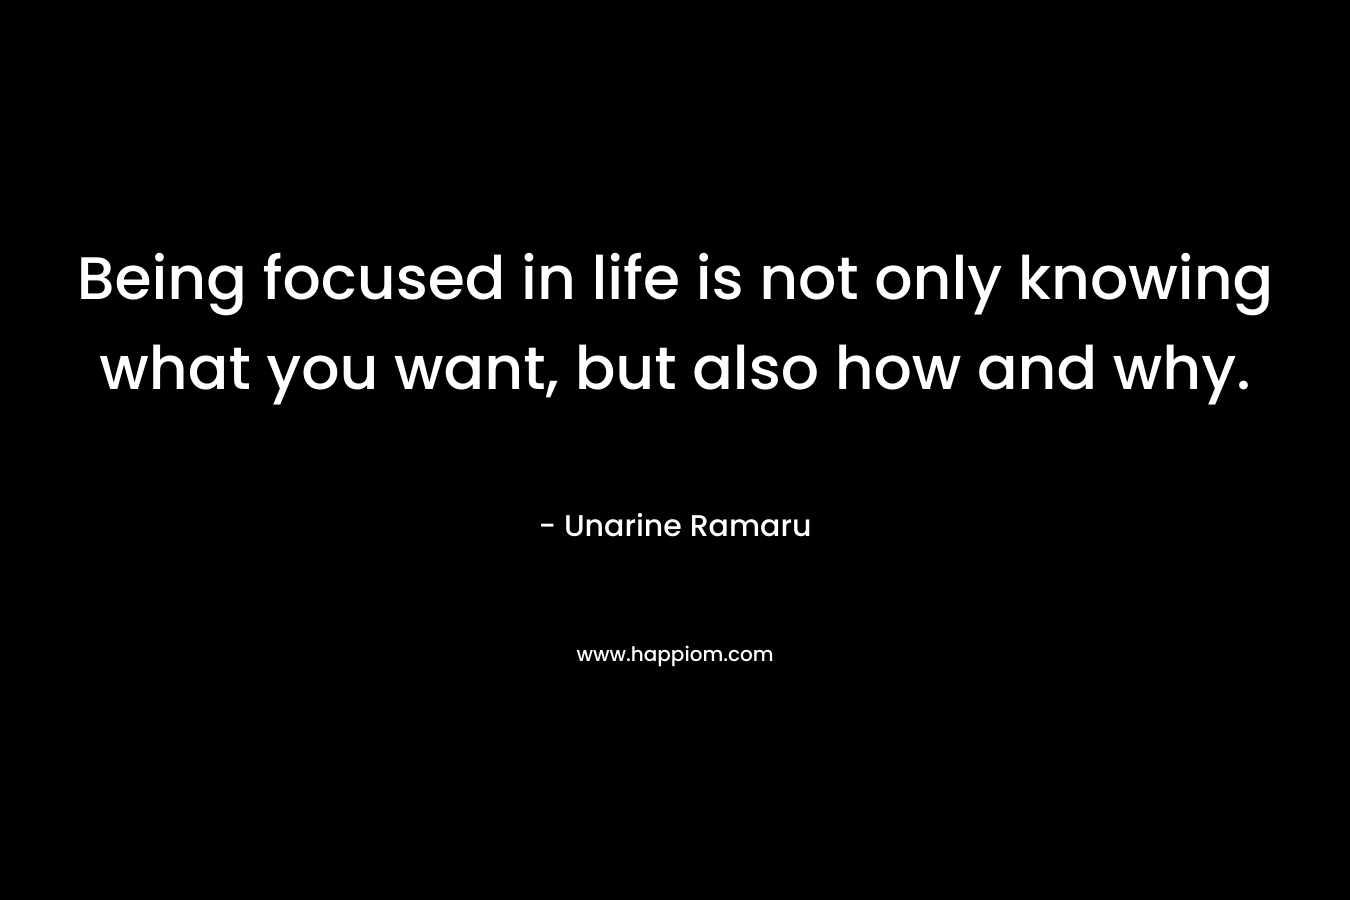 Being focused in life is not only knowing what you want, but also how and why.